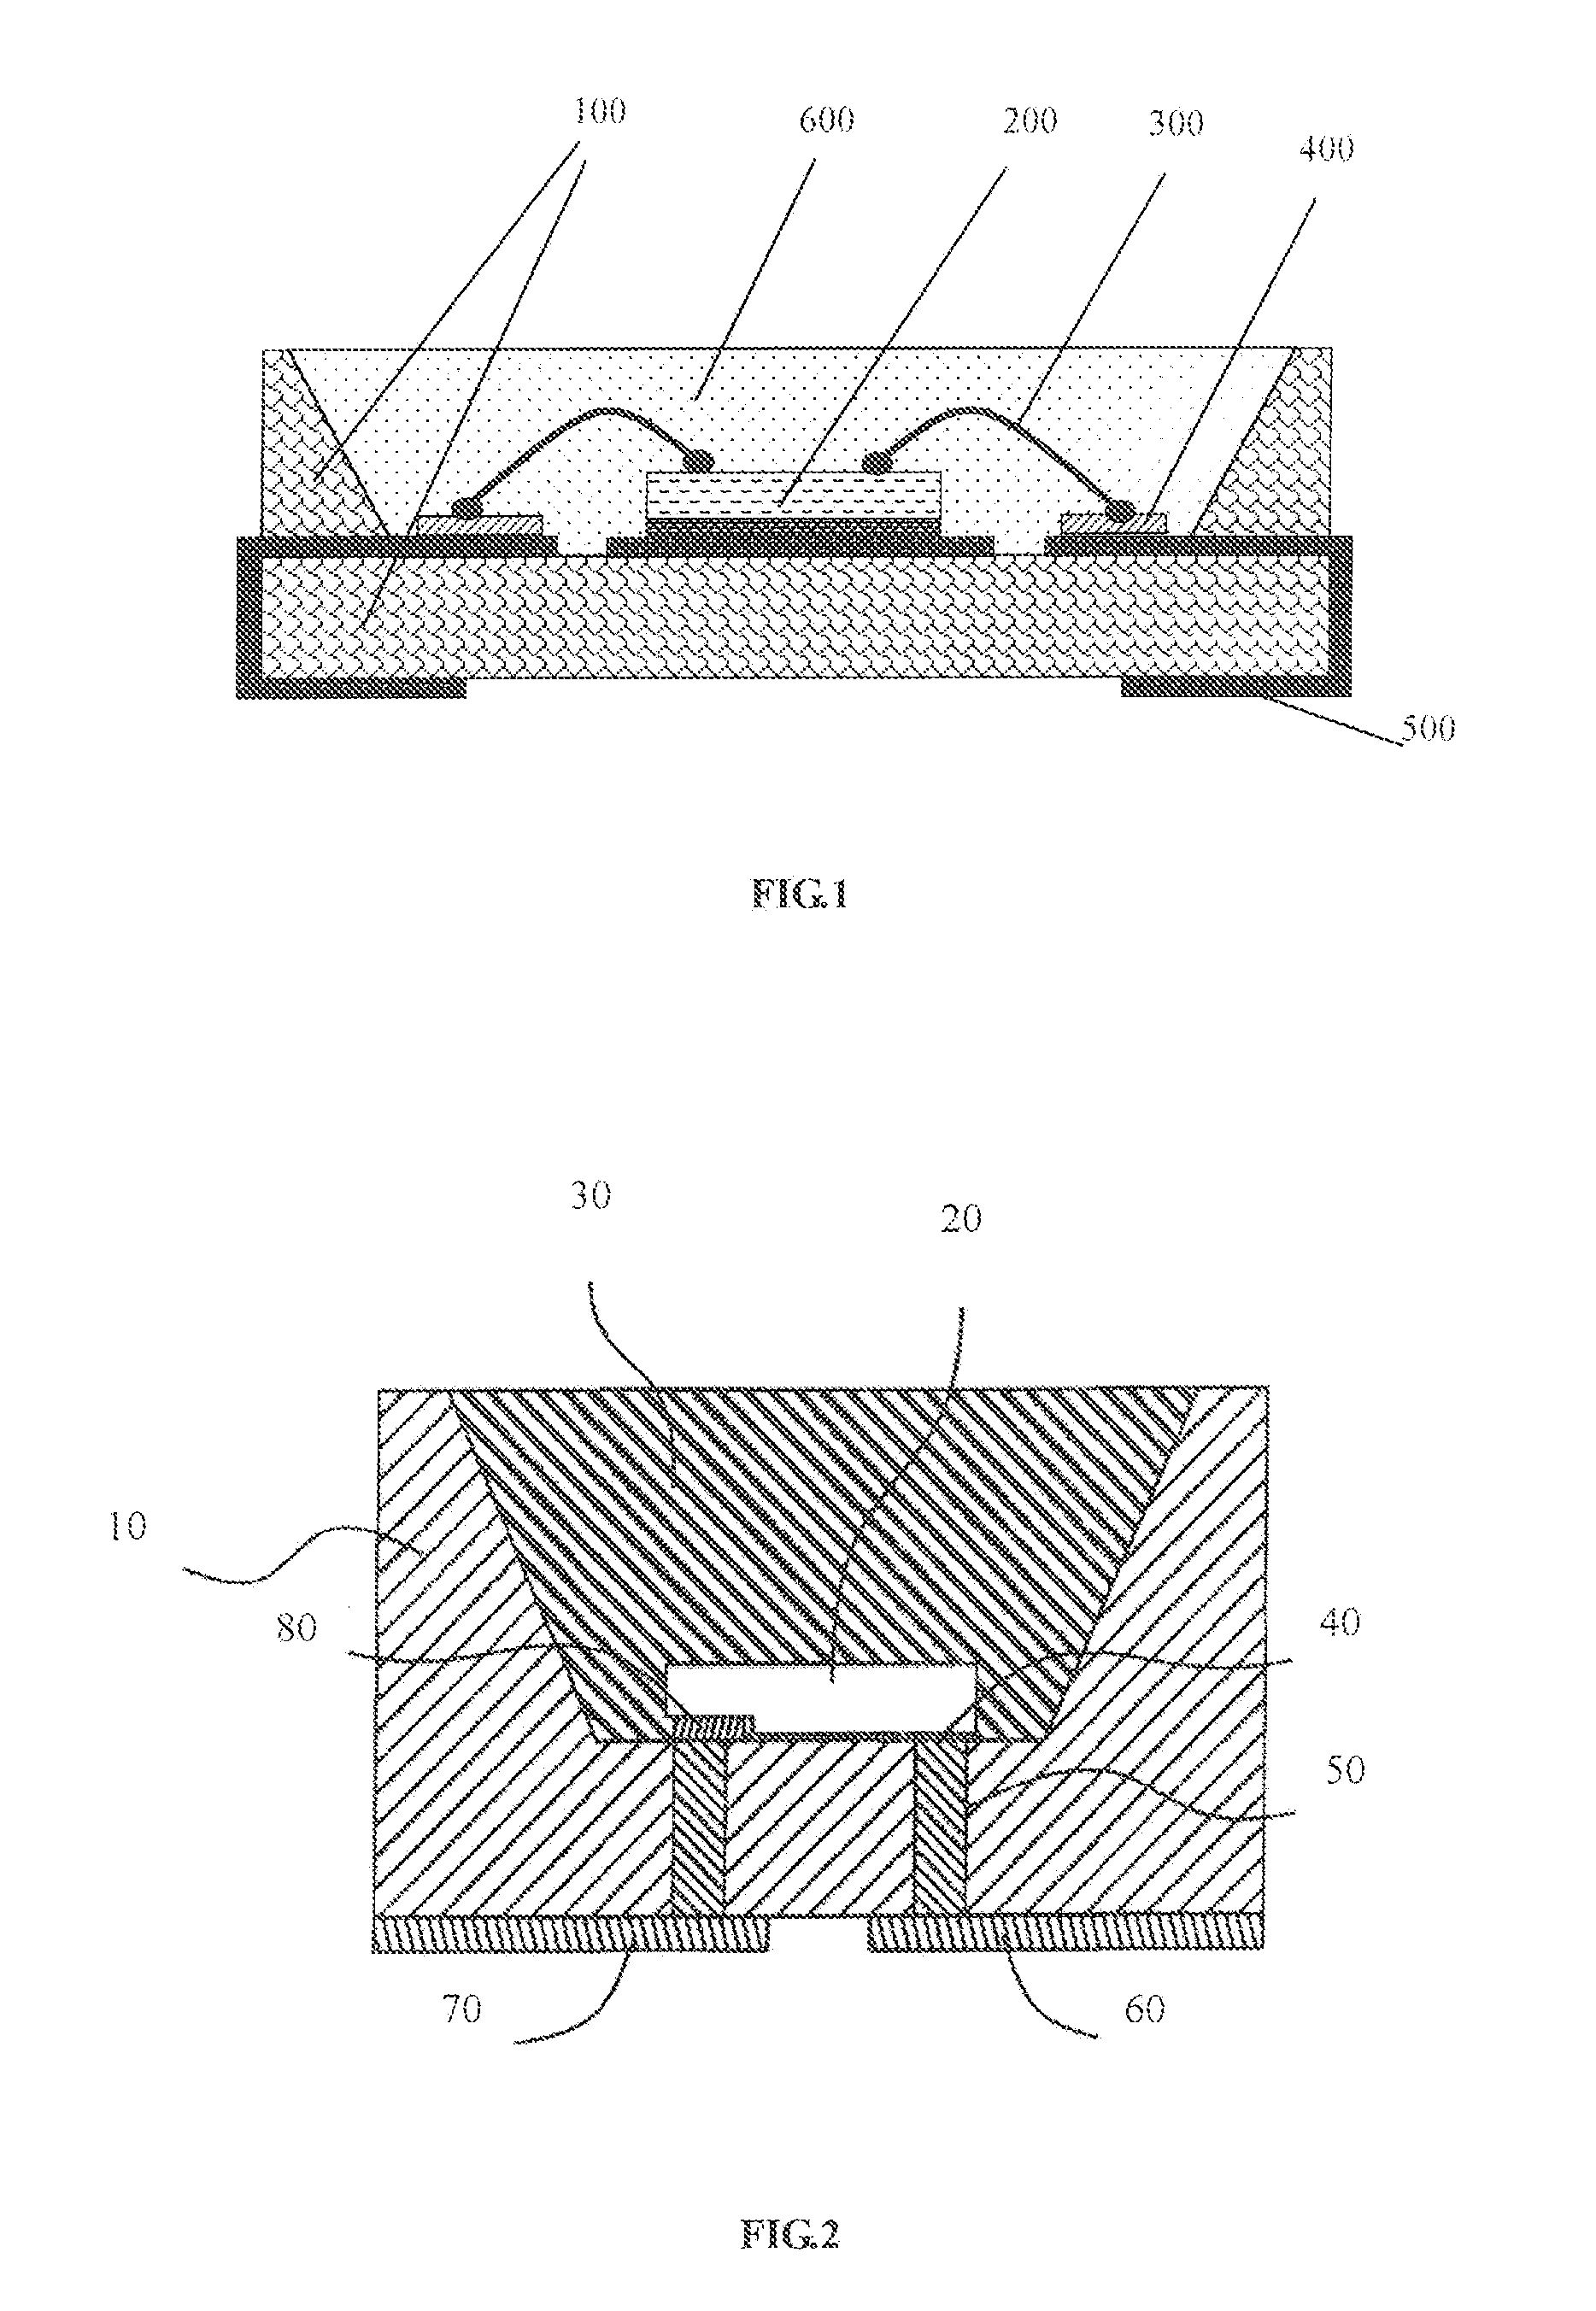 Surface mounted LED packaging structure and method based on a silicon substrate